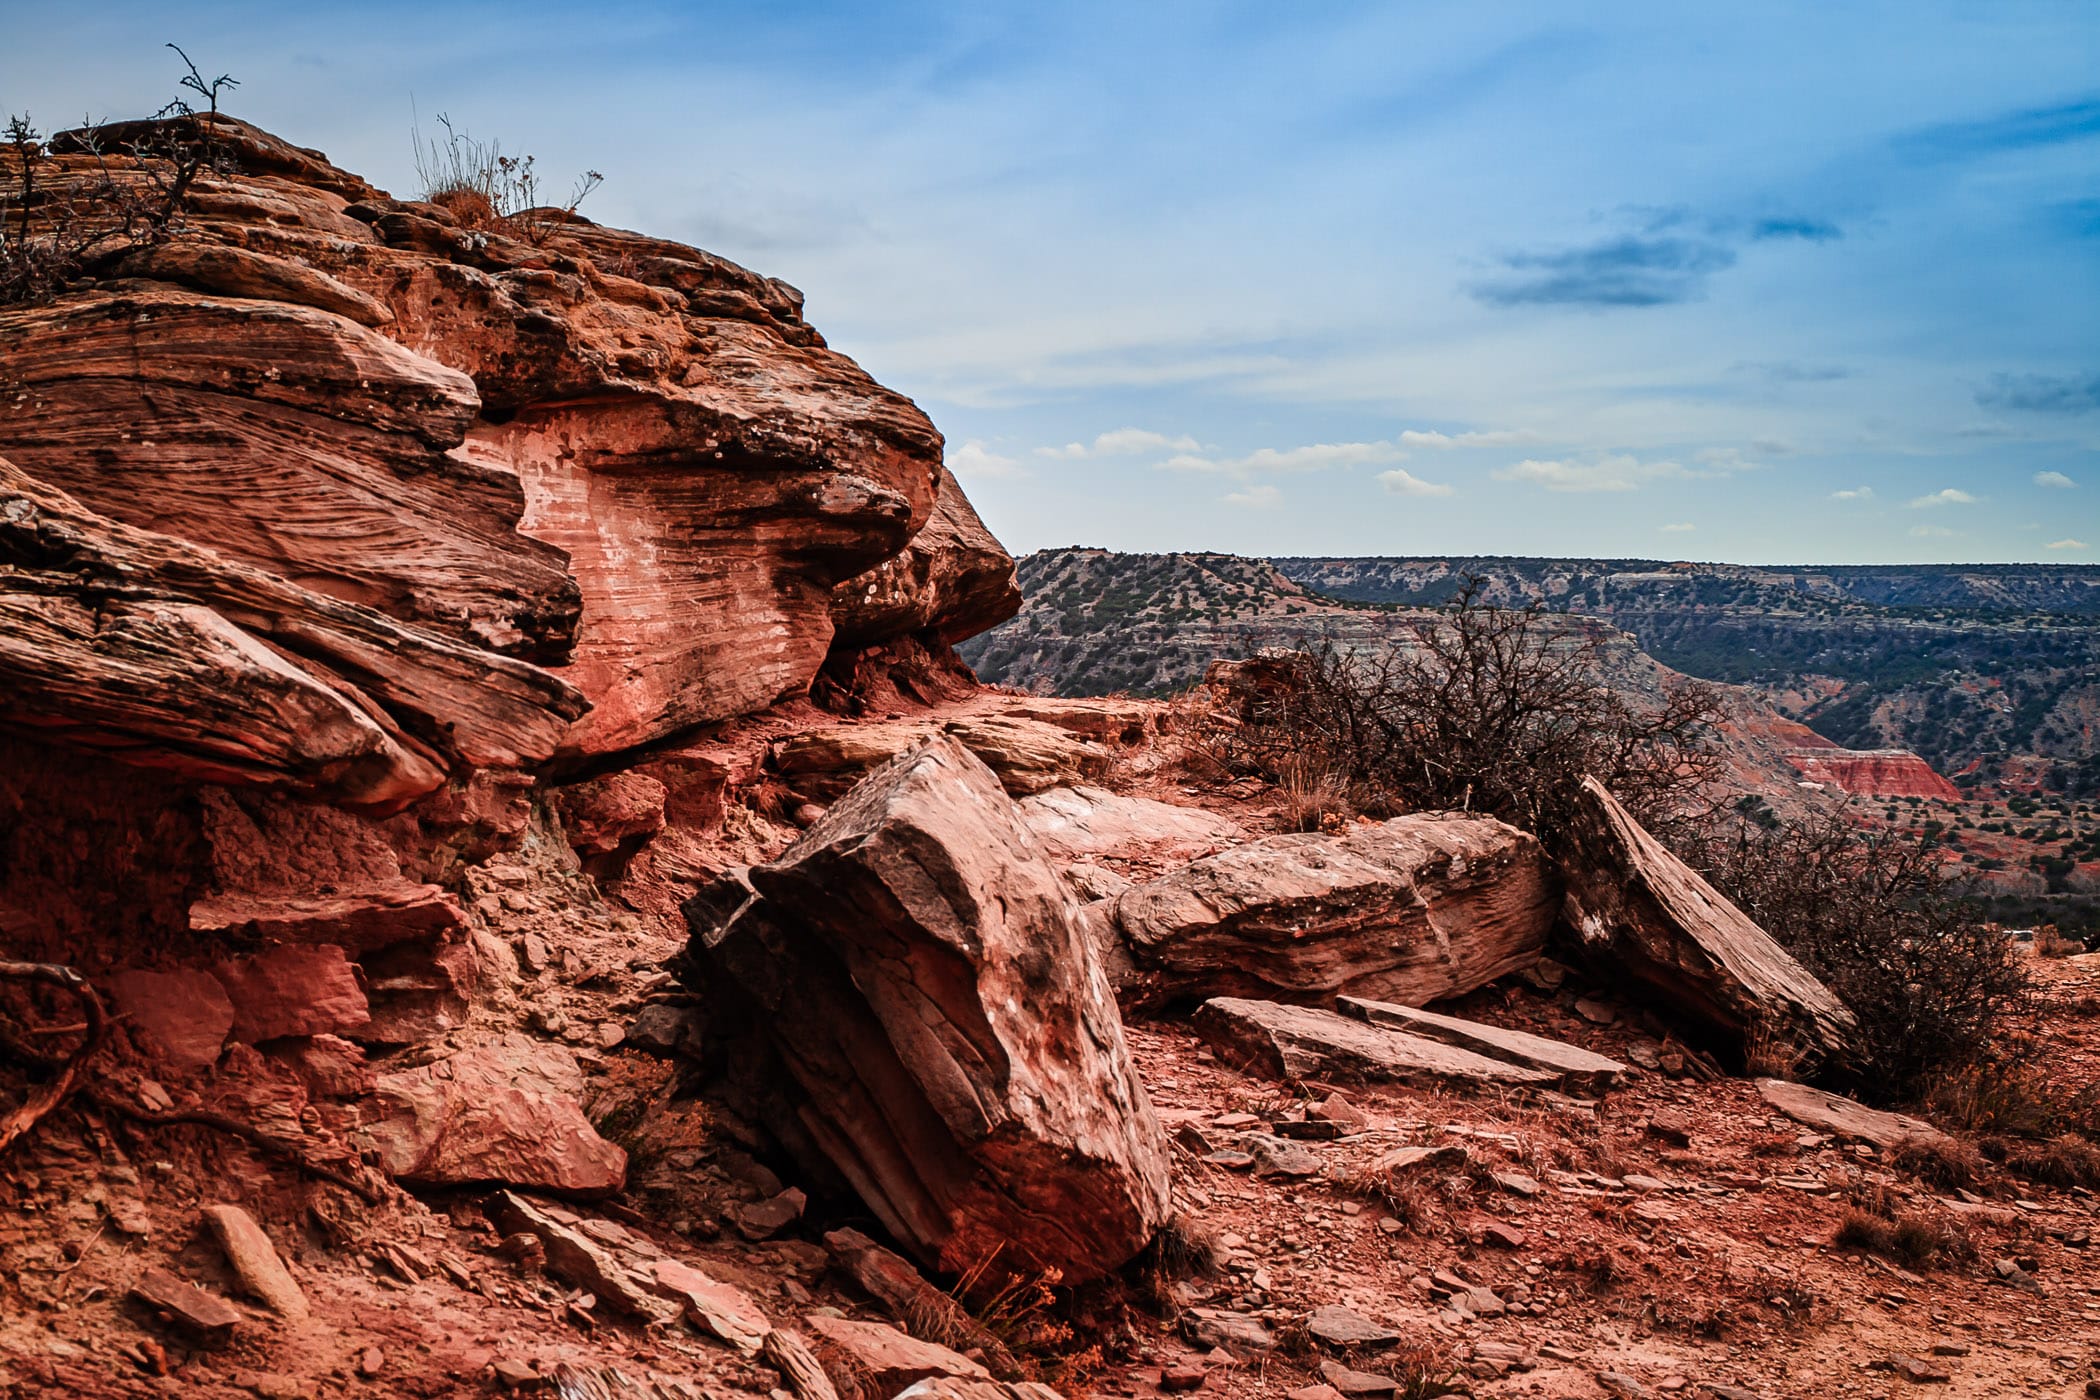 A pile of rocks on the rim of Texas' Palo Duro Canyon.